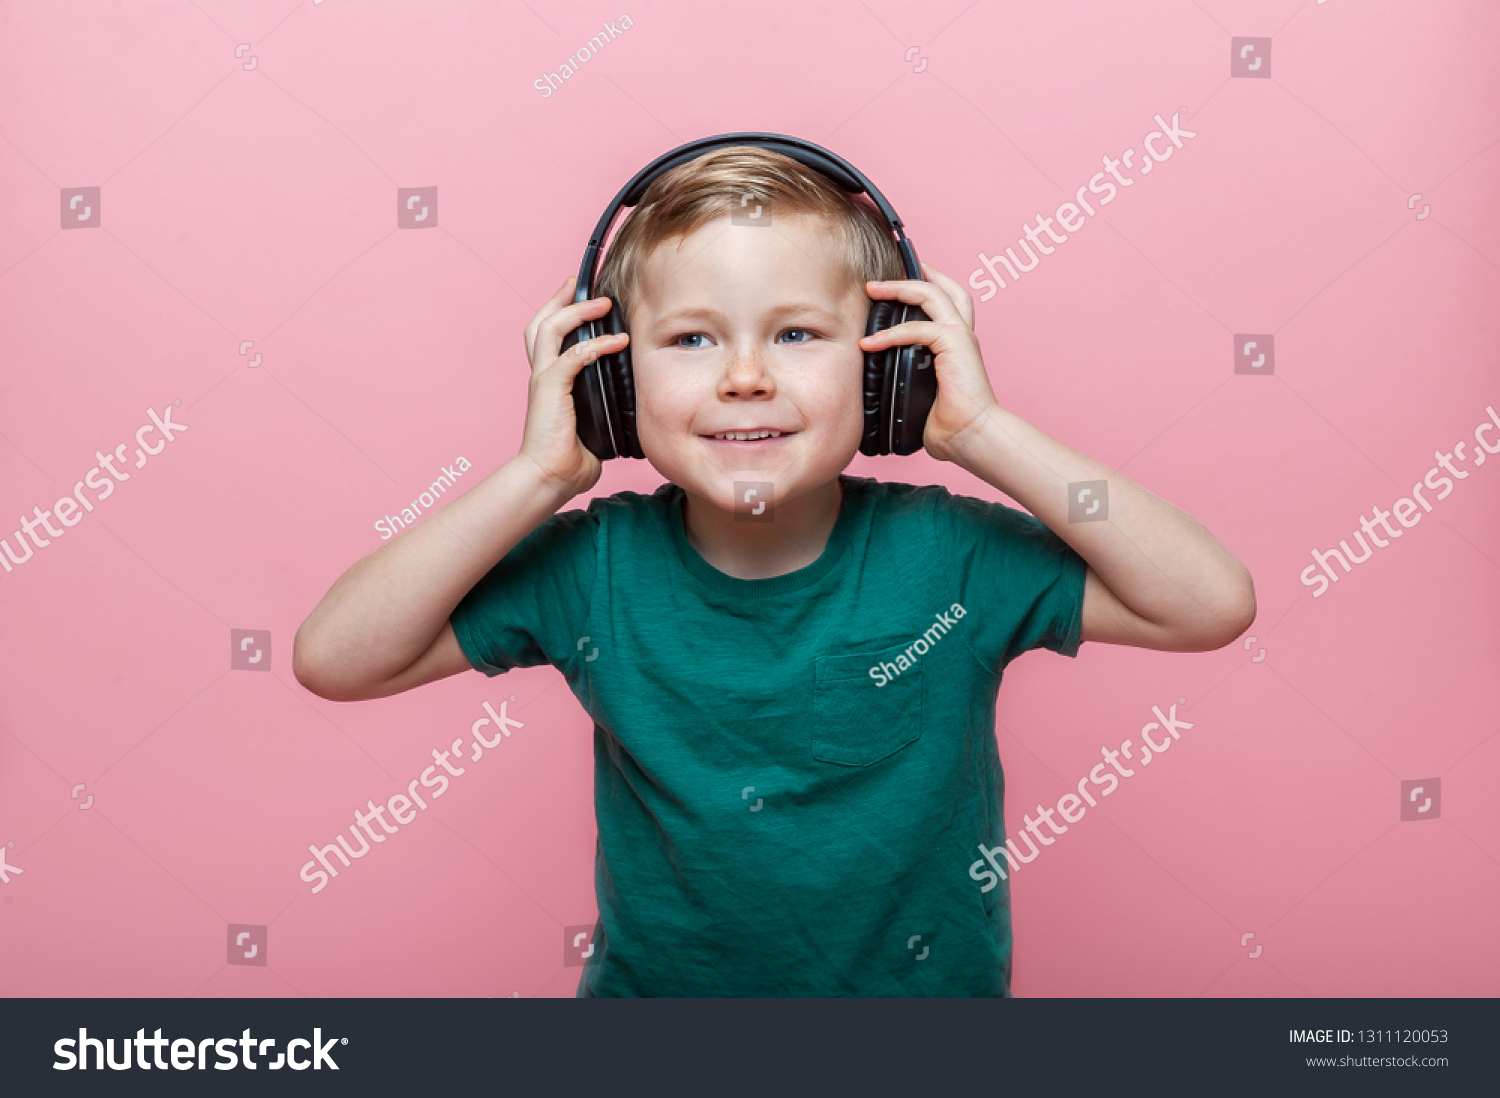 Blue-haired boy listening to music - wide 7